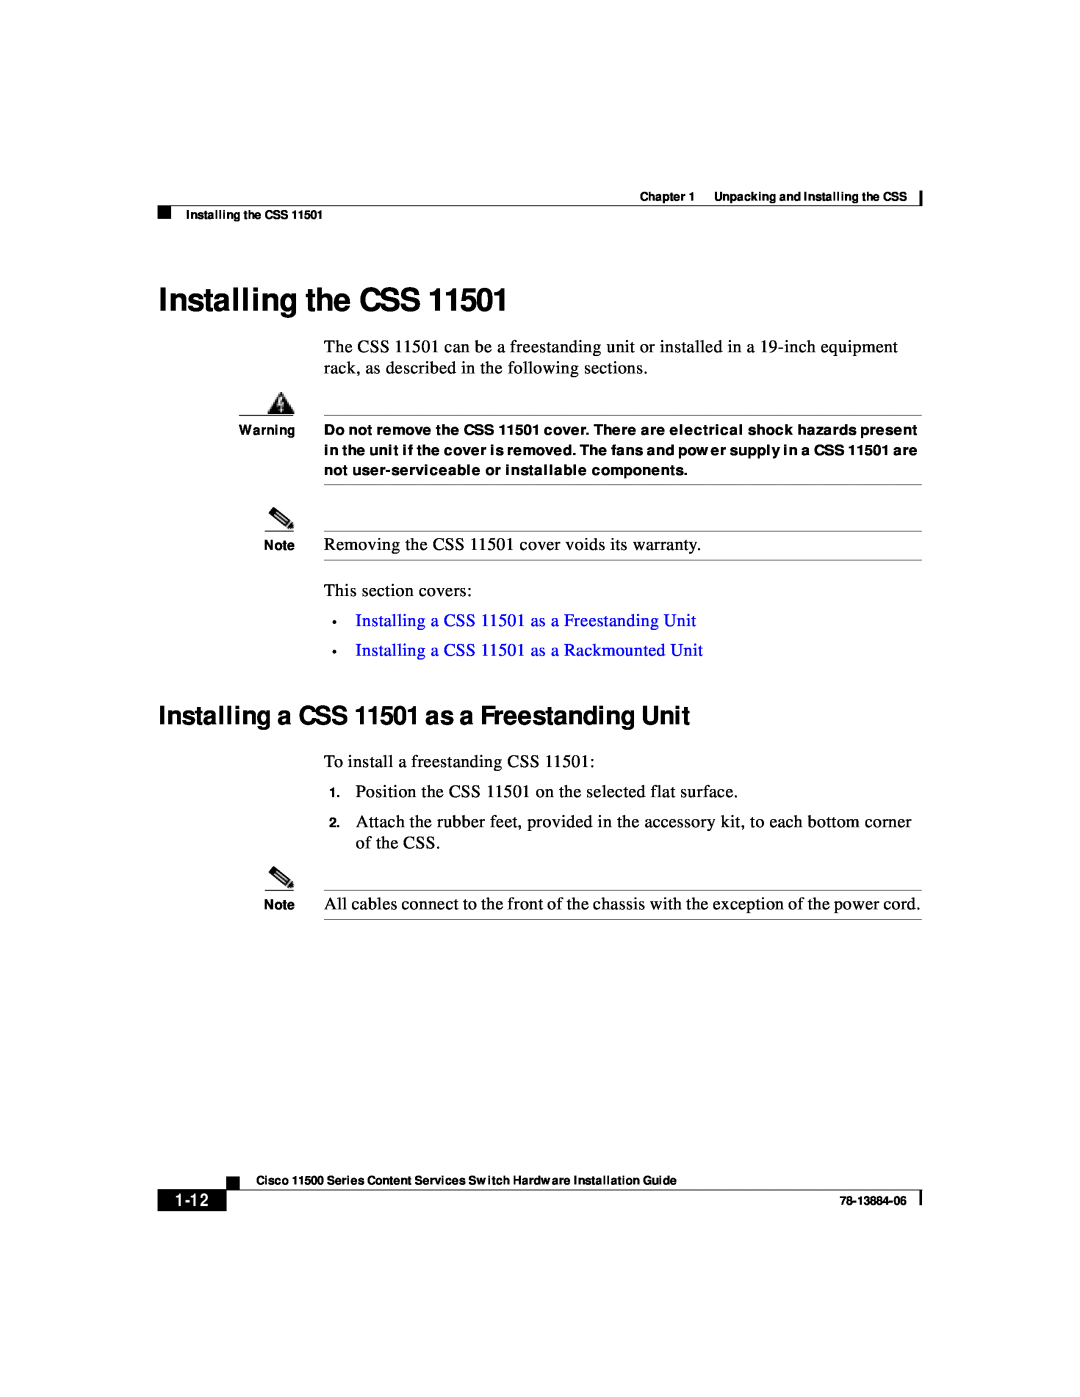 Cisco Systems 11500 Series manual Installing the CSS, Installing a CSS 11501 as a Freestanding Unit, 1-12 